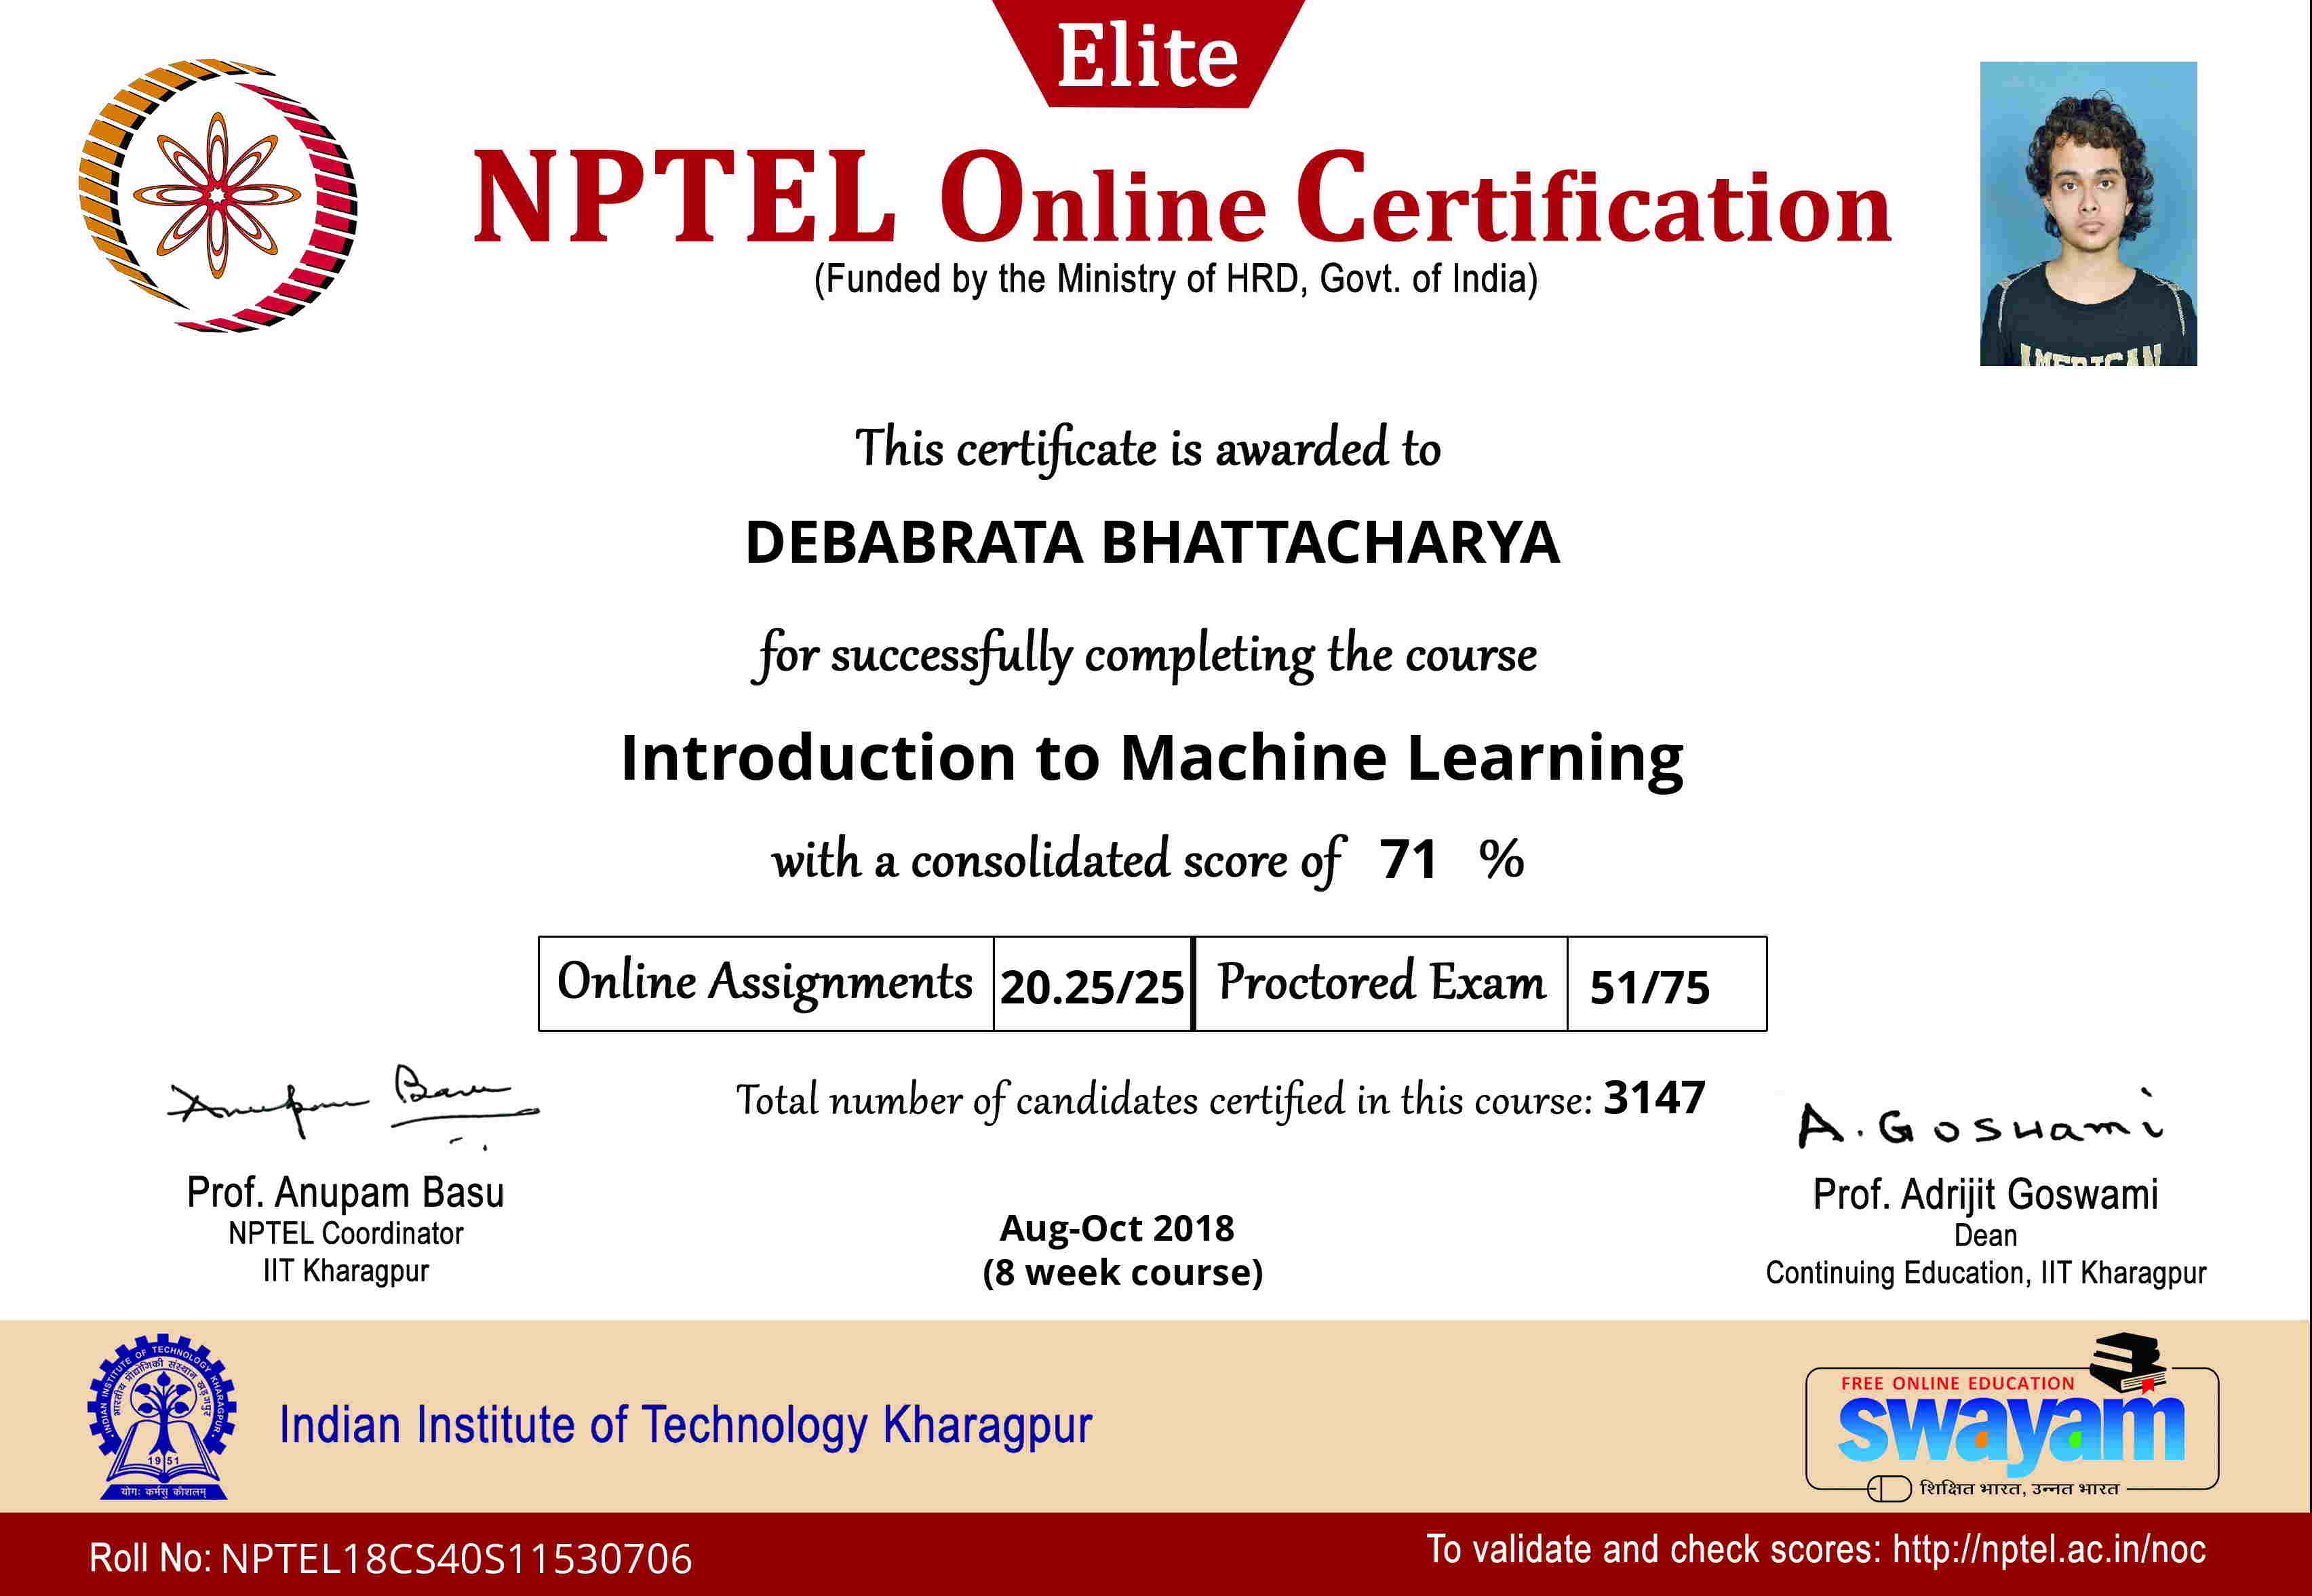 NPTEL Introduction to Machine Learning